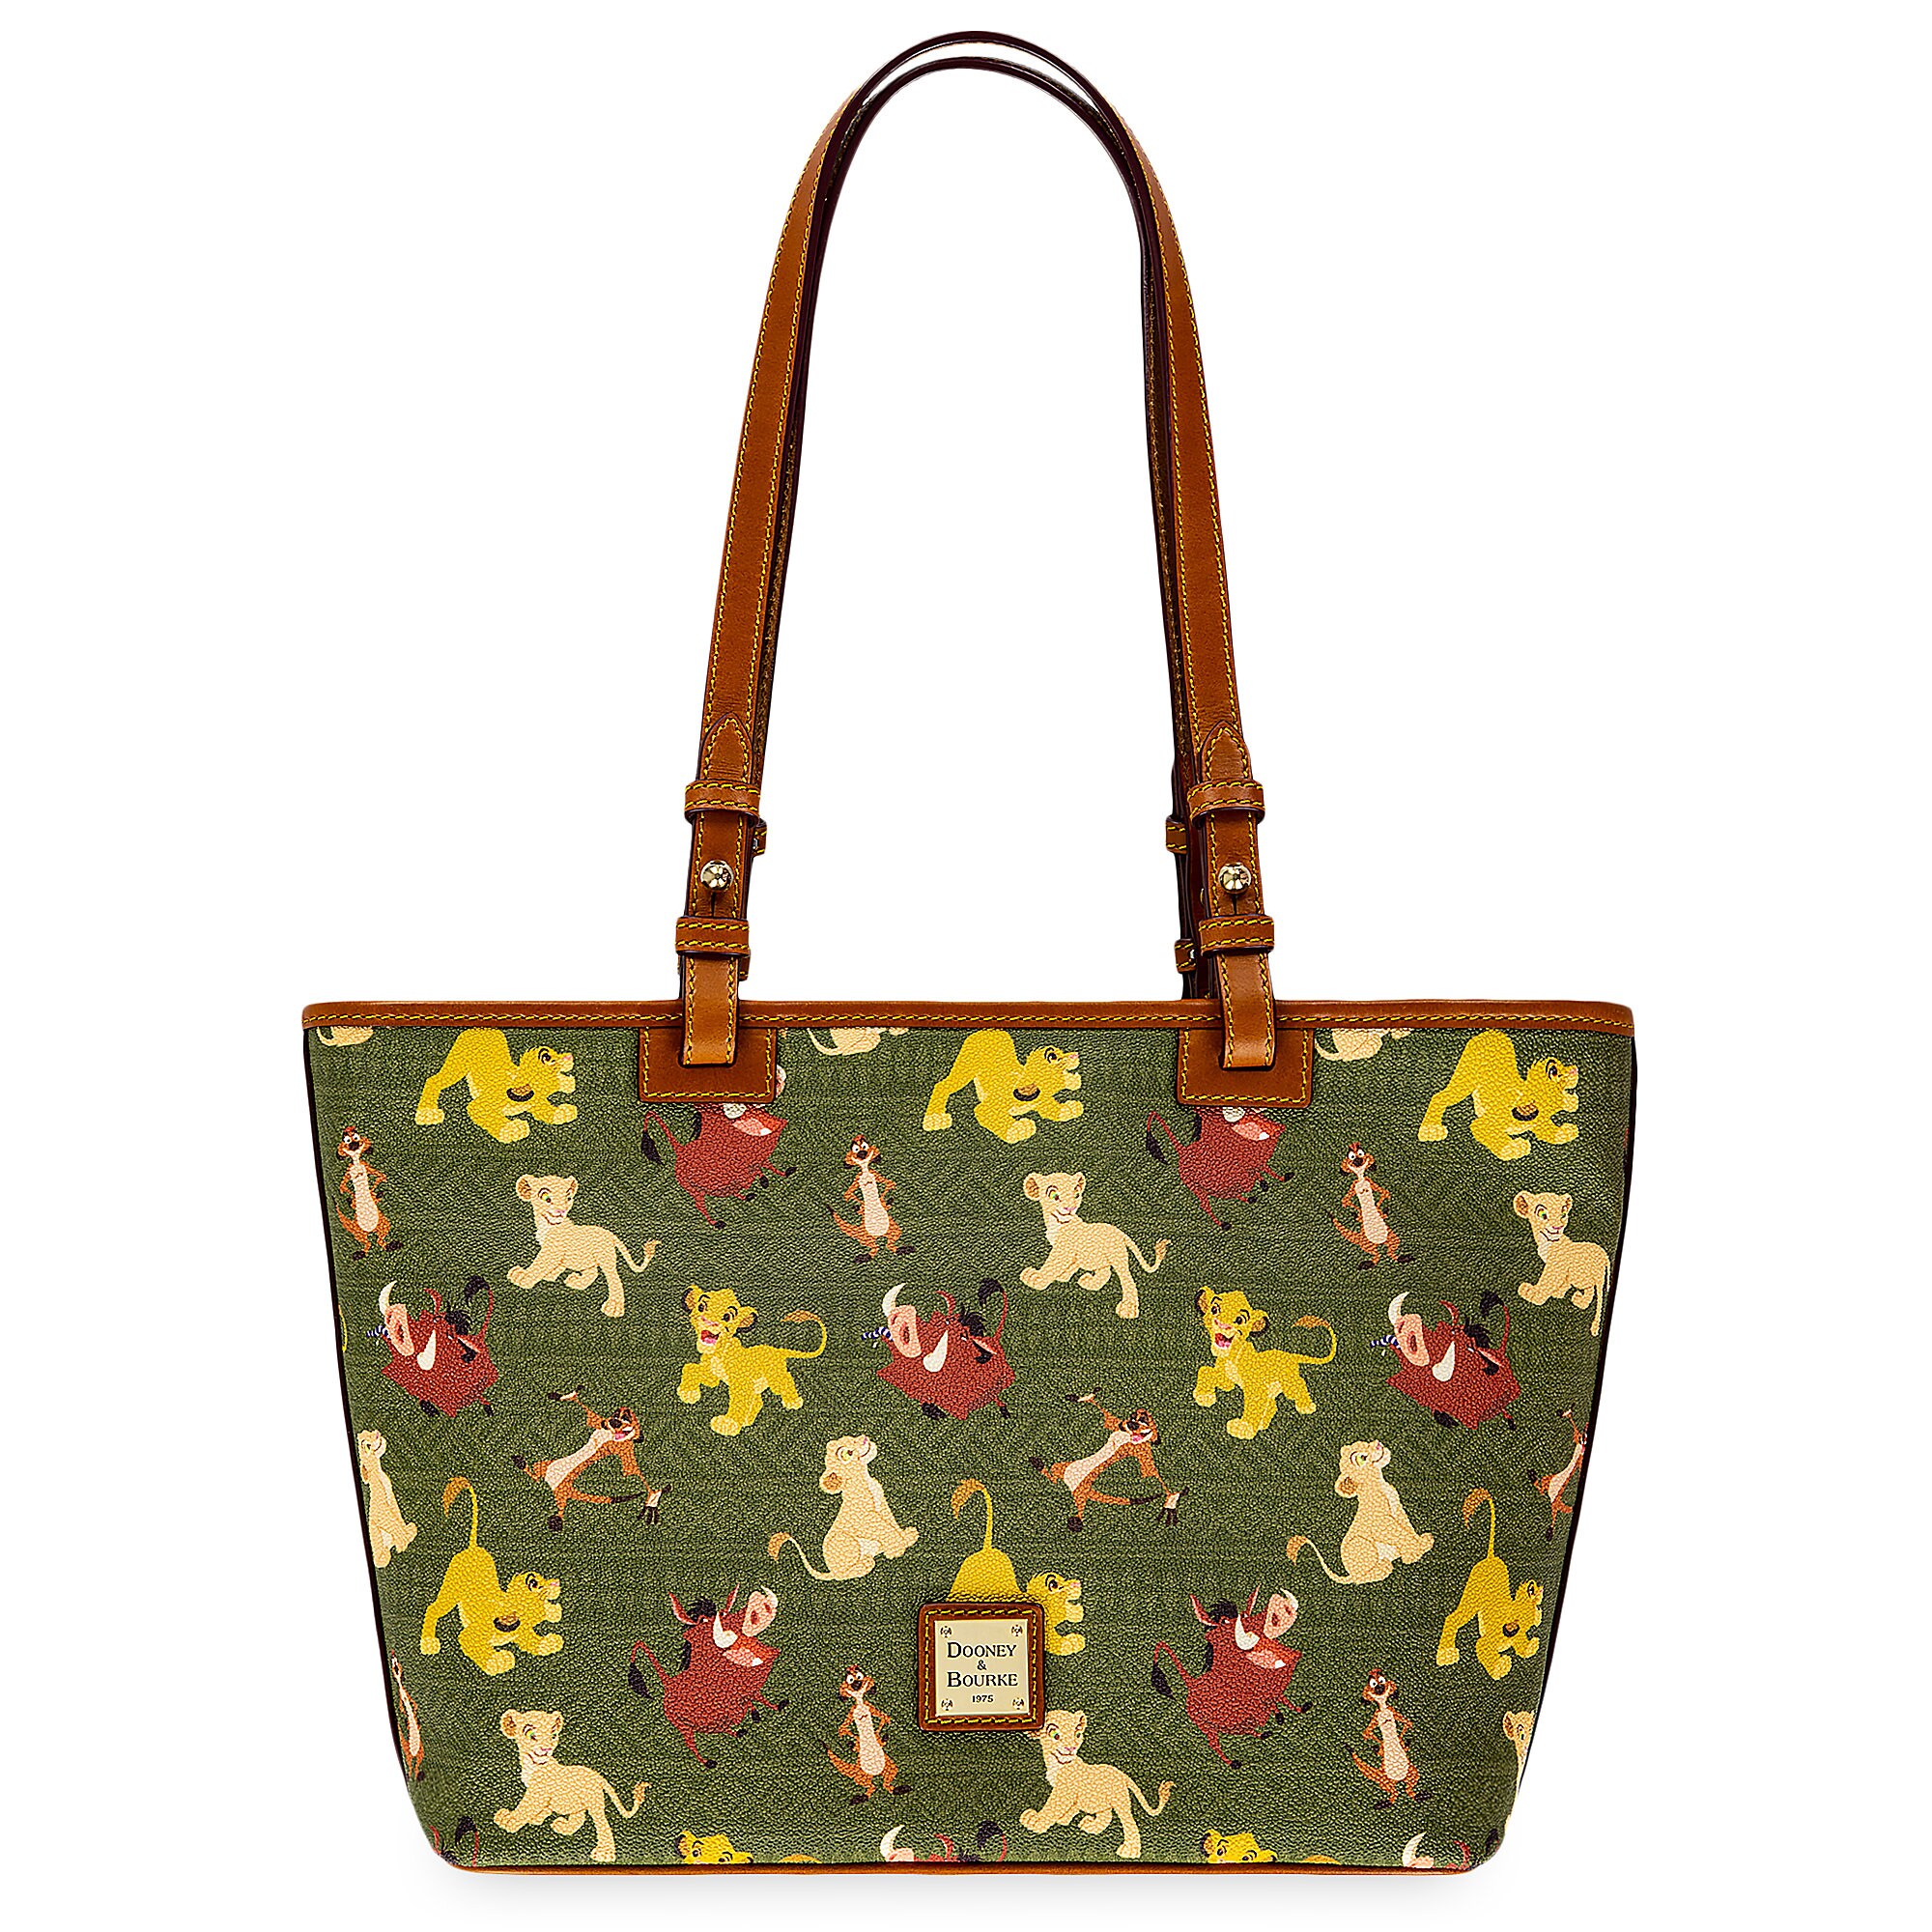 The Lion King Tote Bag by Dooney & Bourke